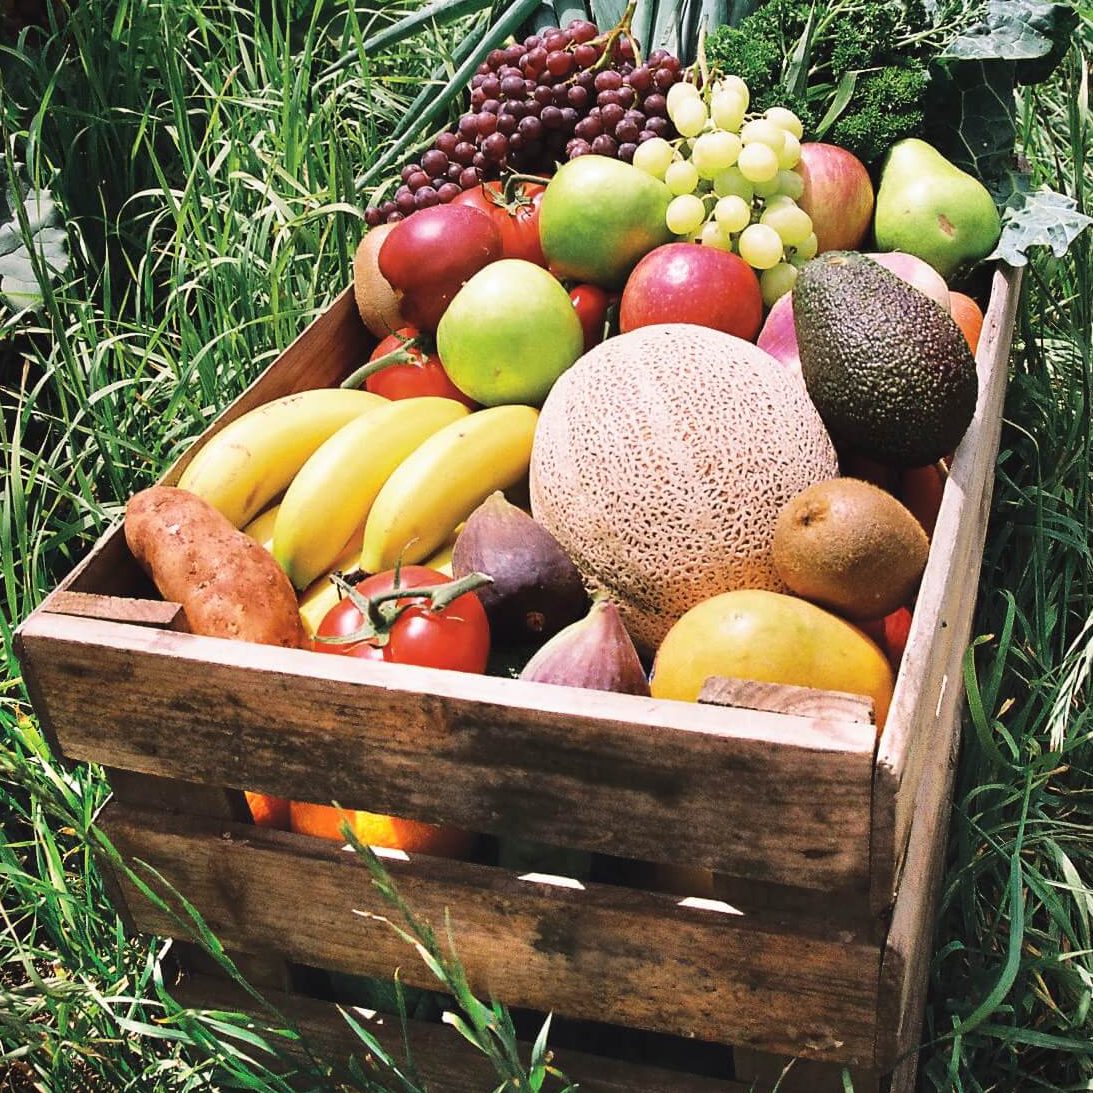 Fruit Box Delivery to your Door